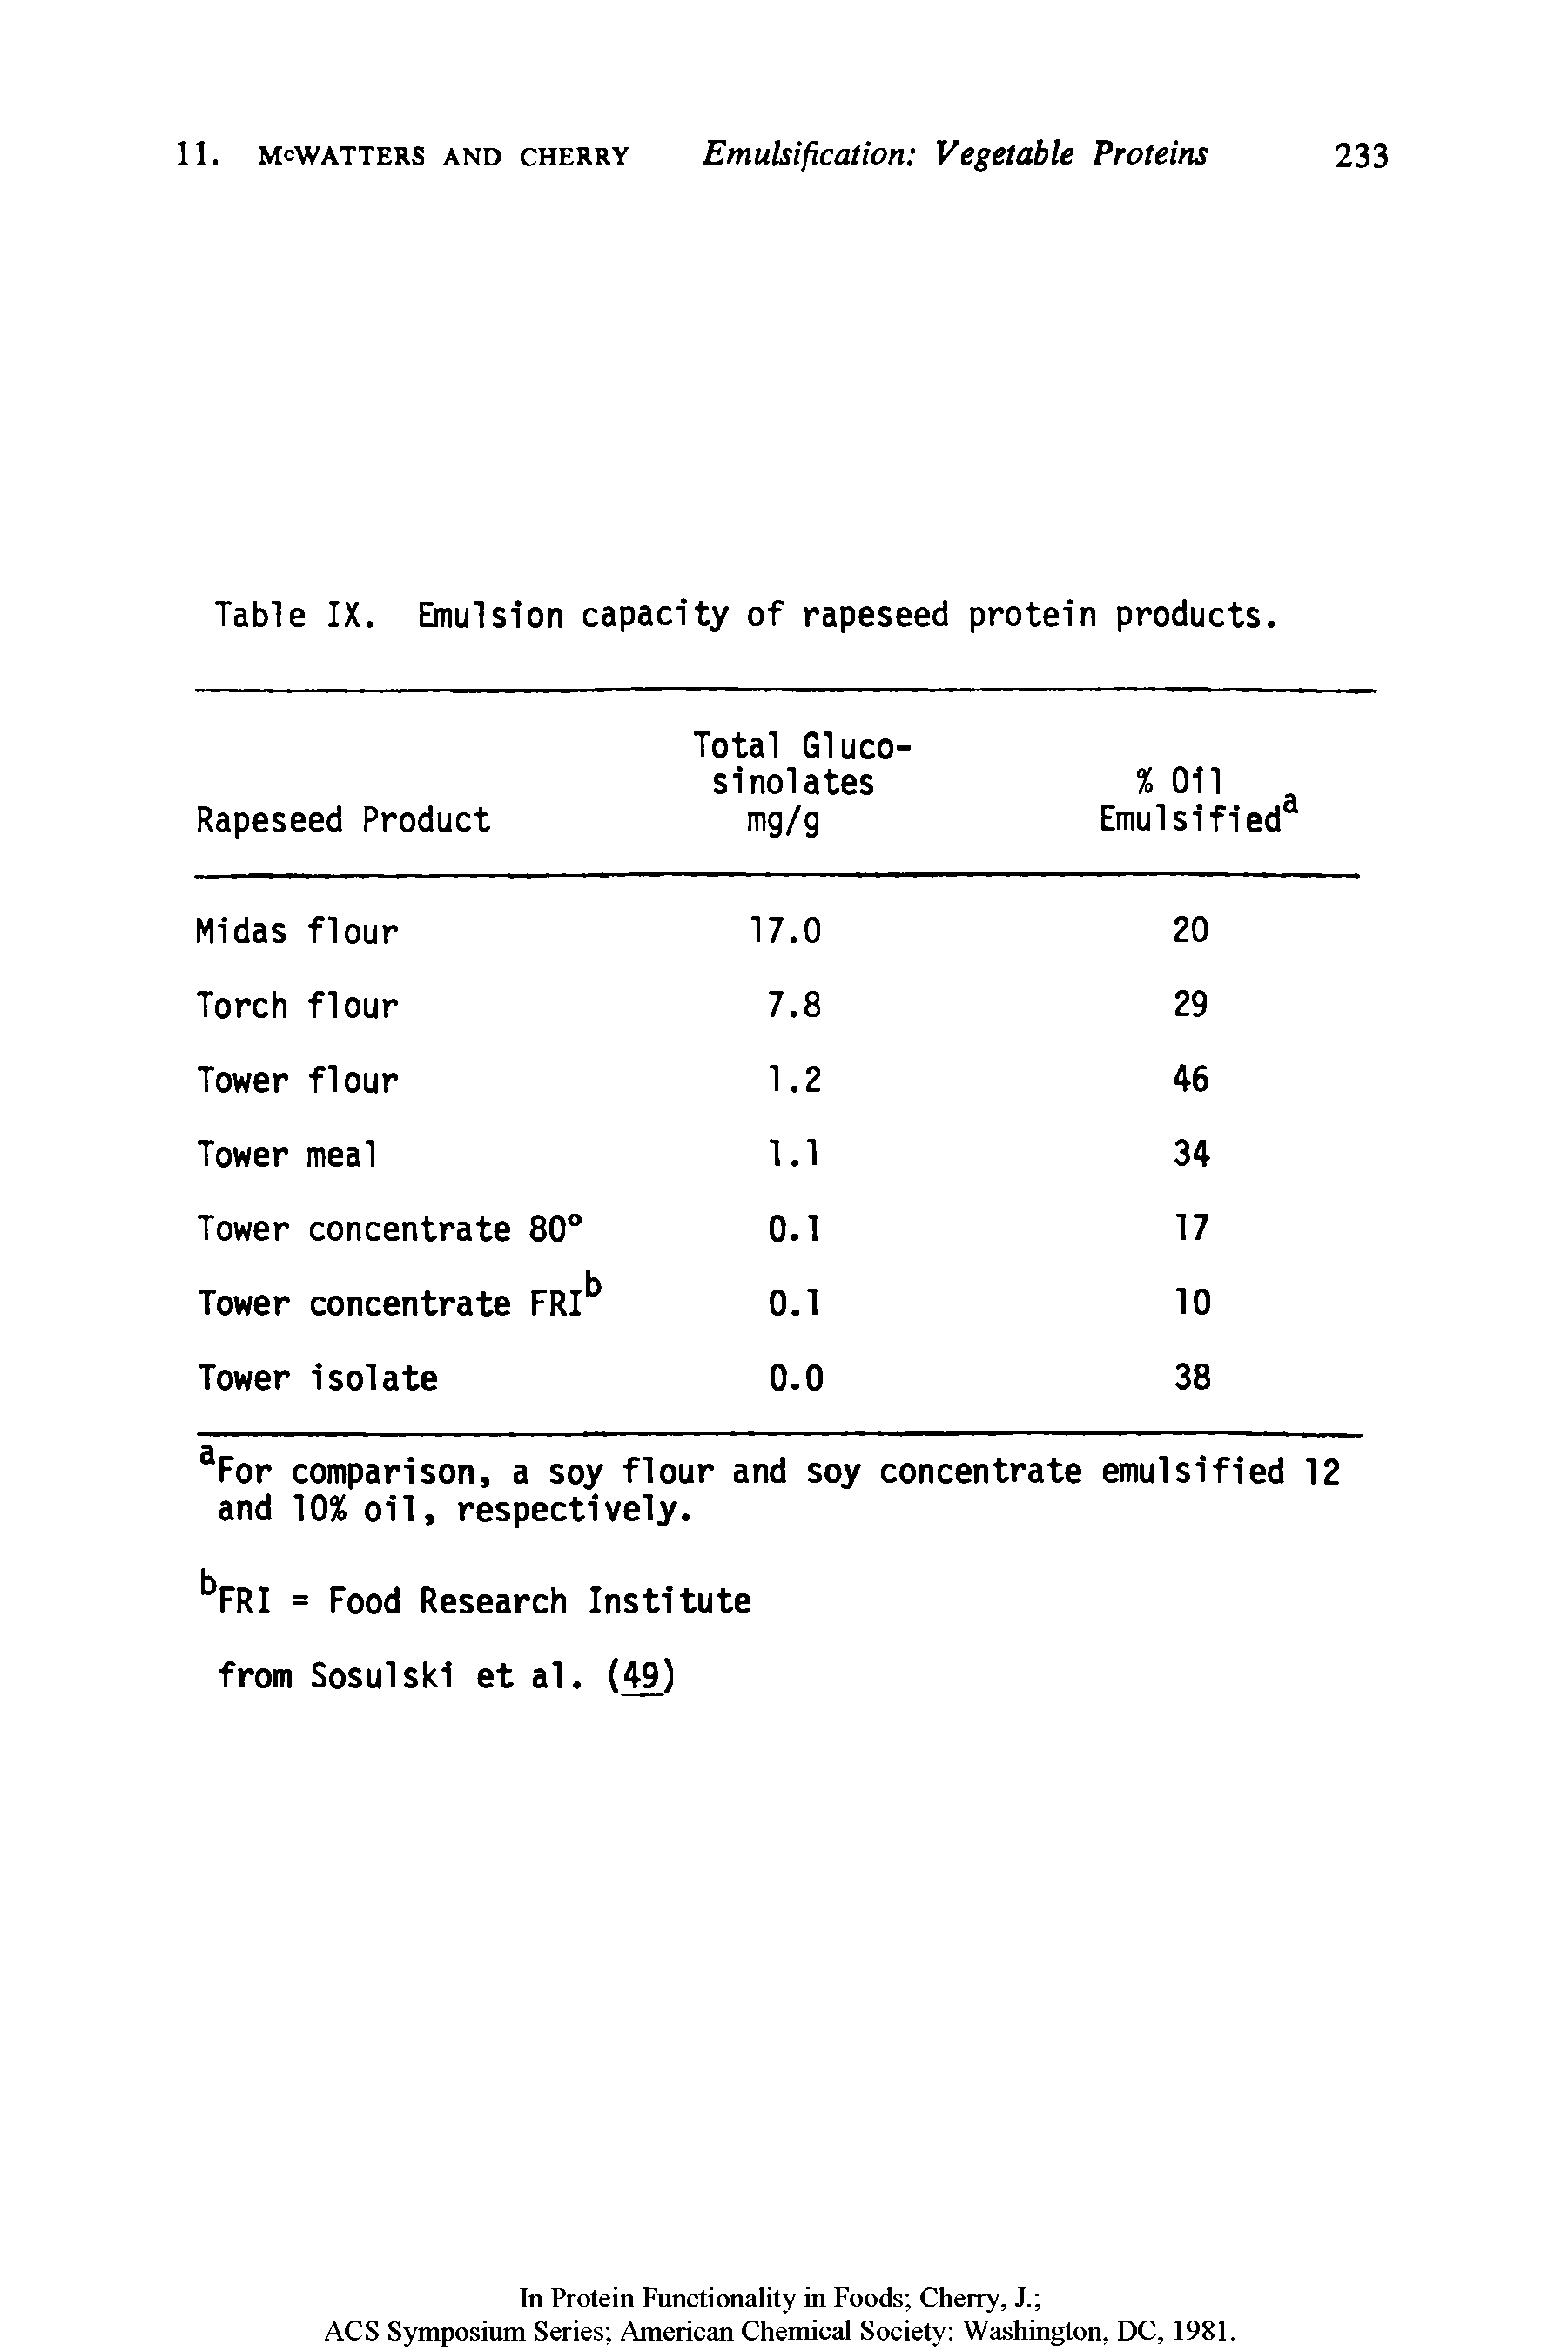 Table IX. Emulsion capacity of rapeseed protein products.